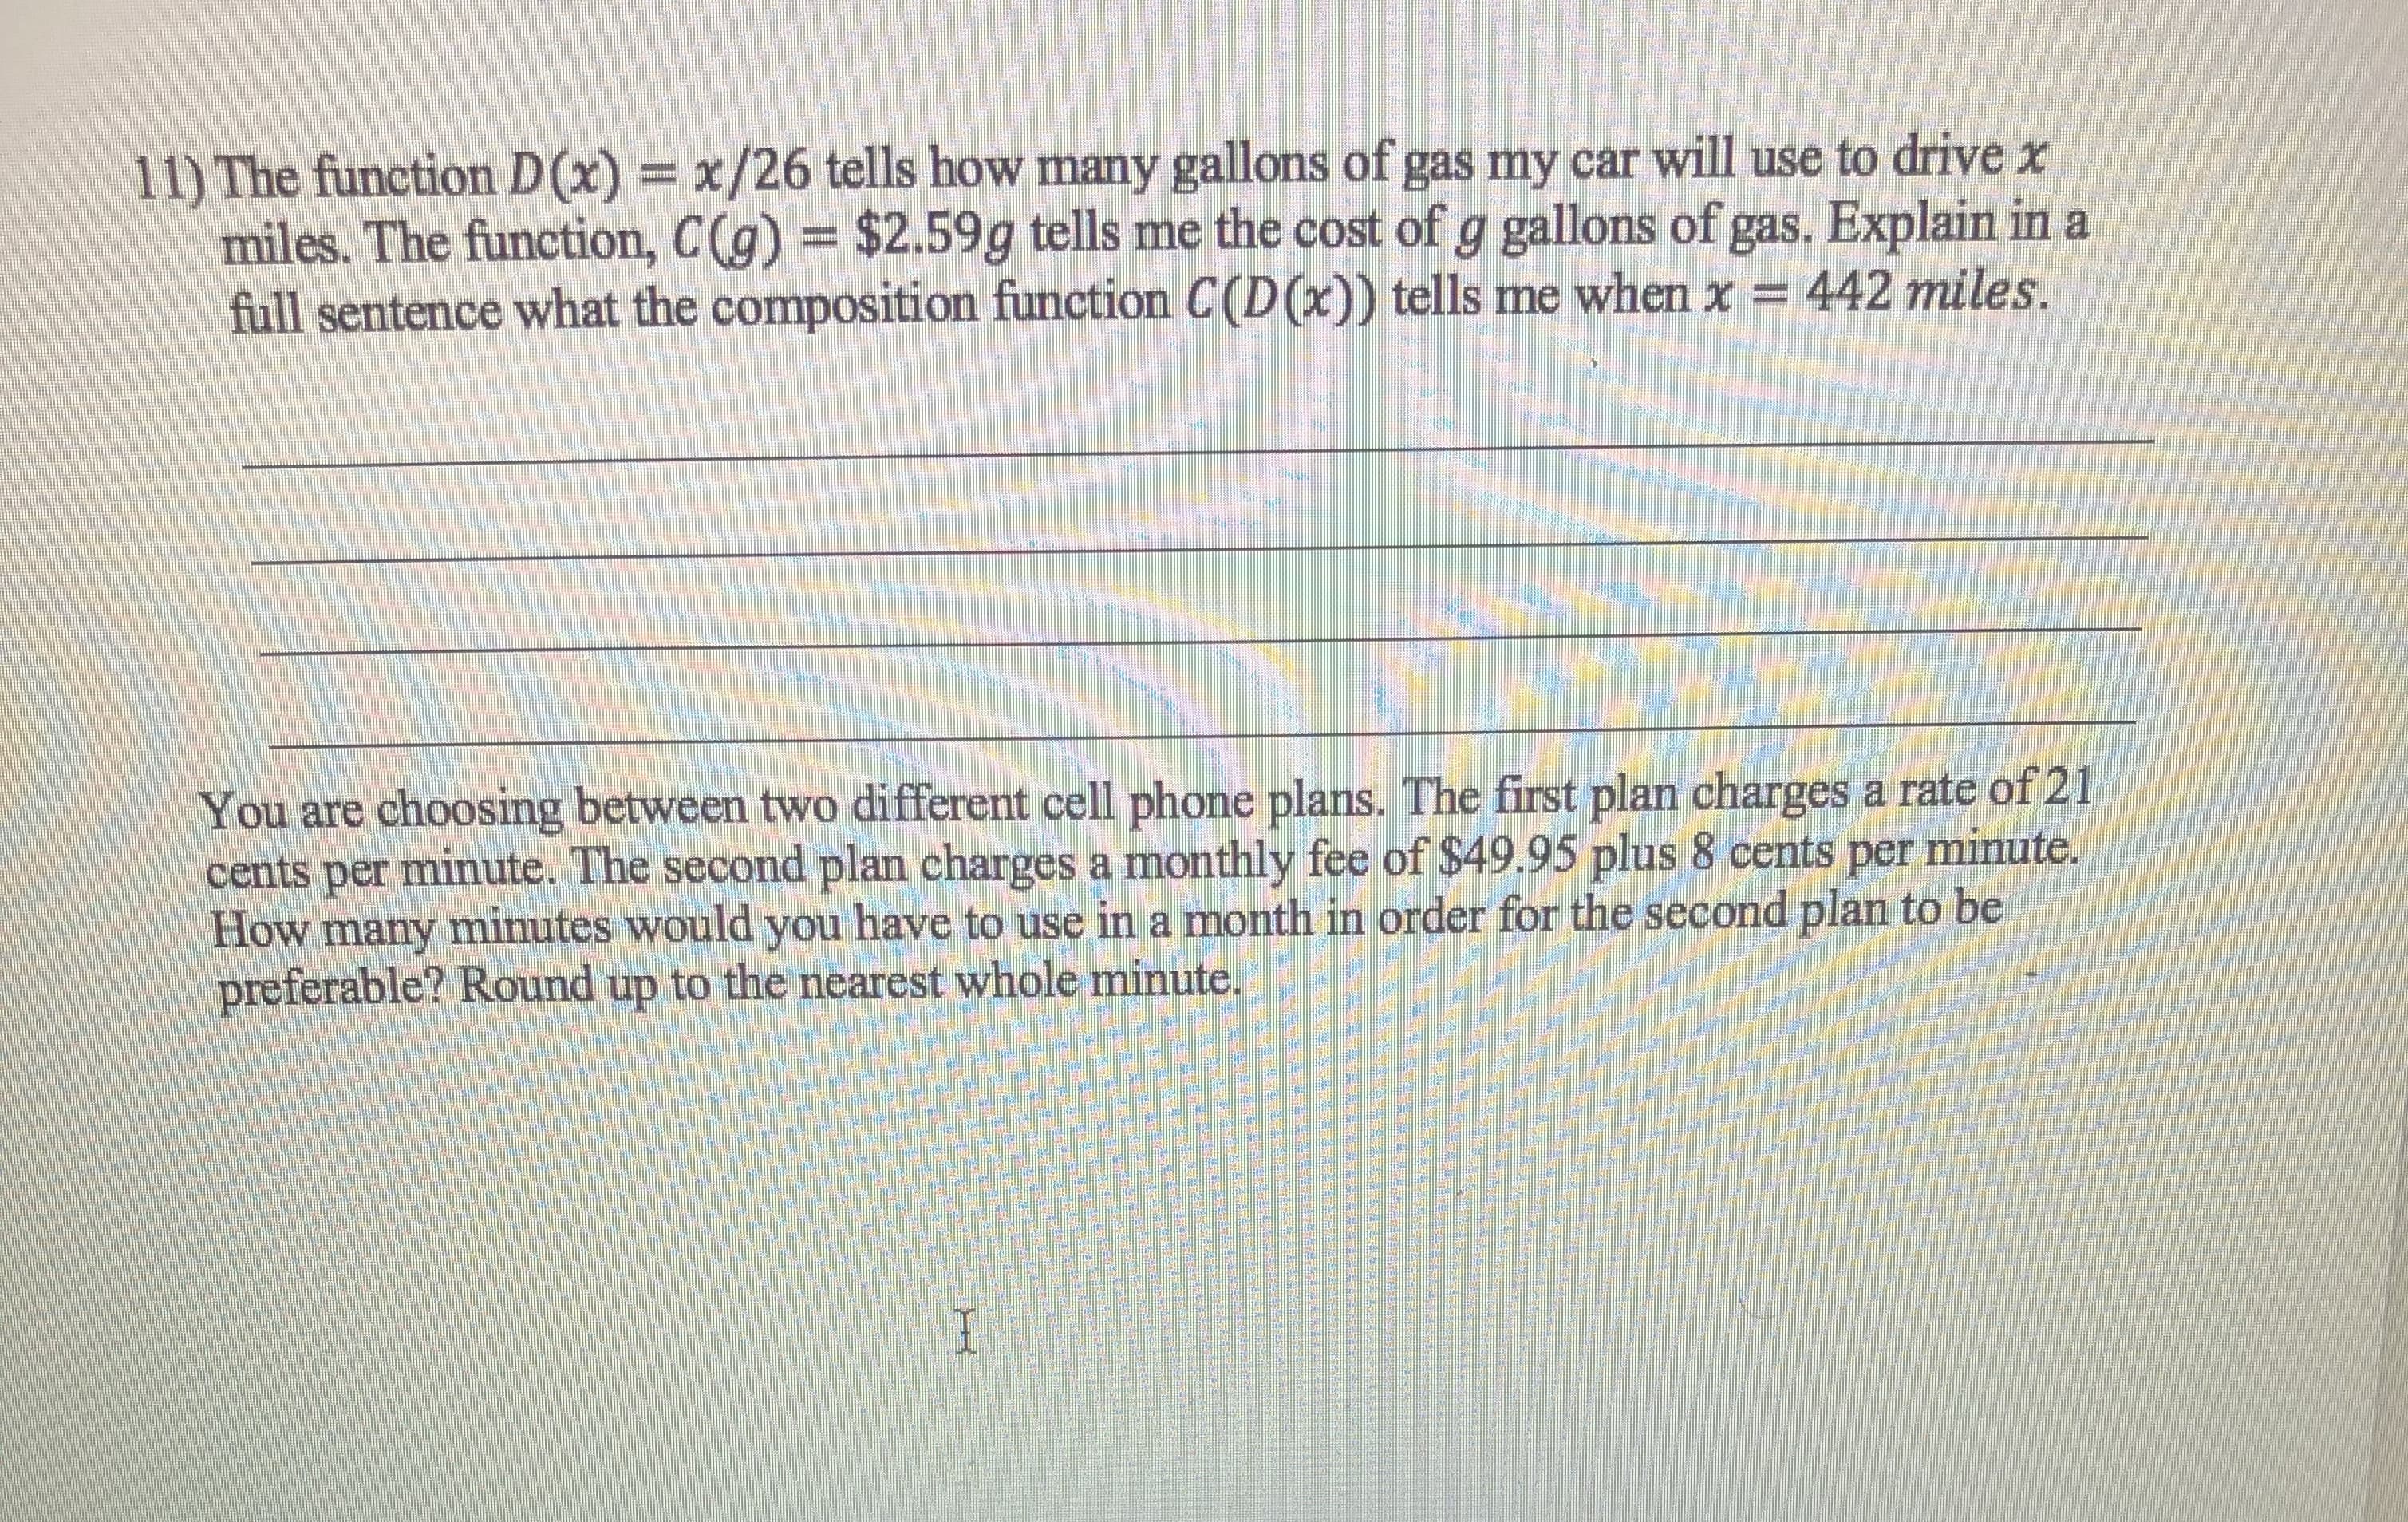 11) The function D(x) = x/26 tells how many gallons of gas my car will use to drive x
miles. The function, C(g) = $2.59g tells me the cost of g gallons of gas. Explain in a
full sentence what the composition function C(D(x)) tells me when x = 442 miles.
